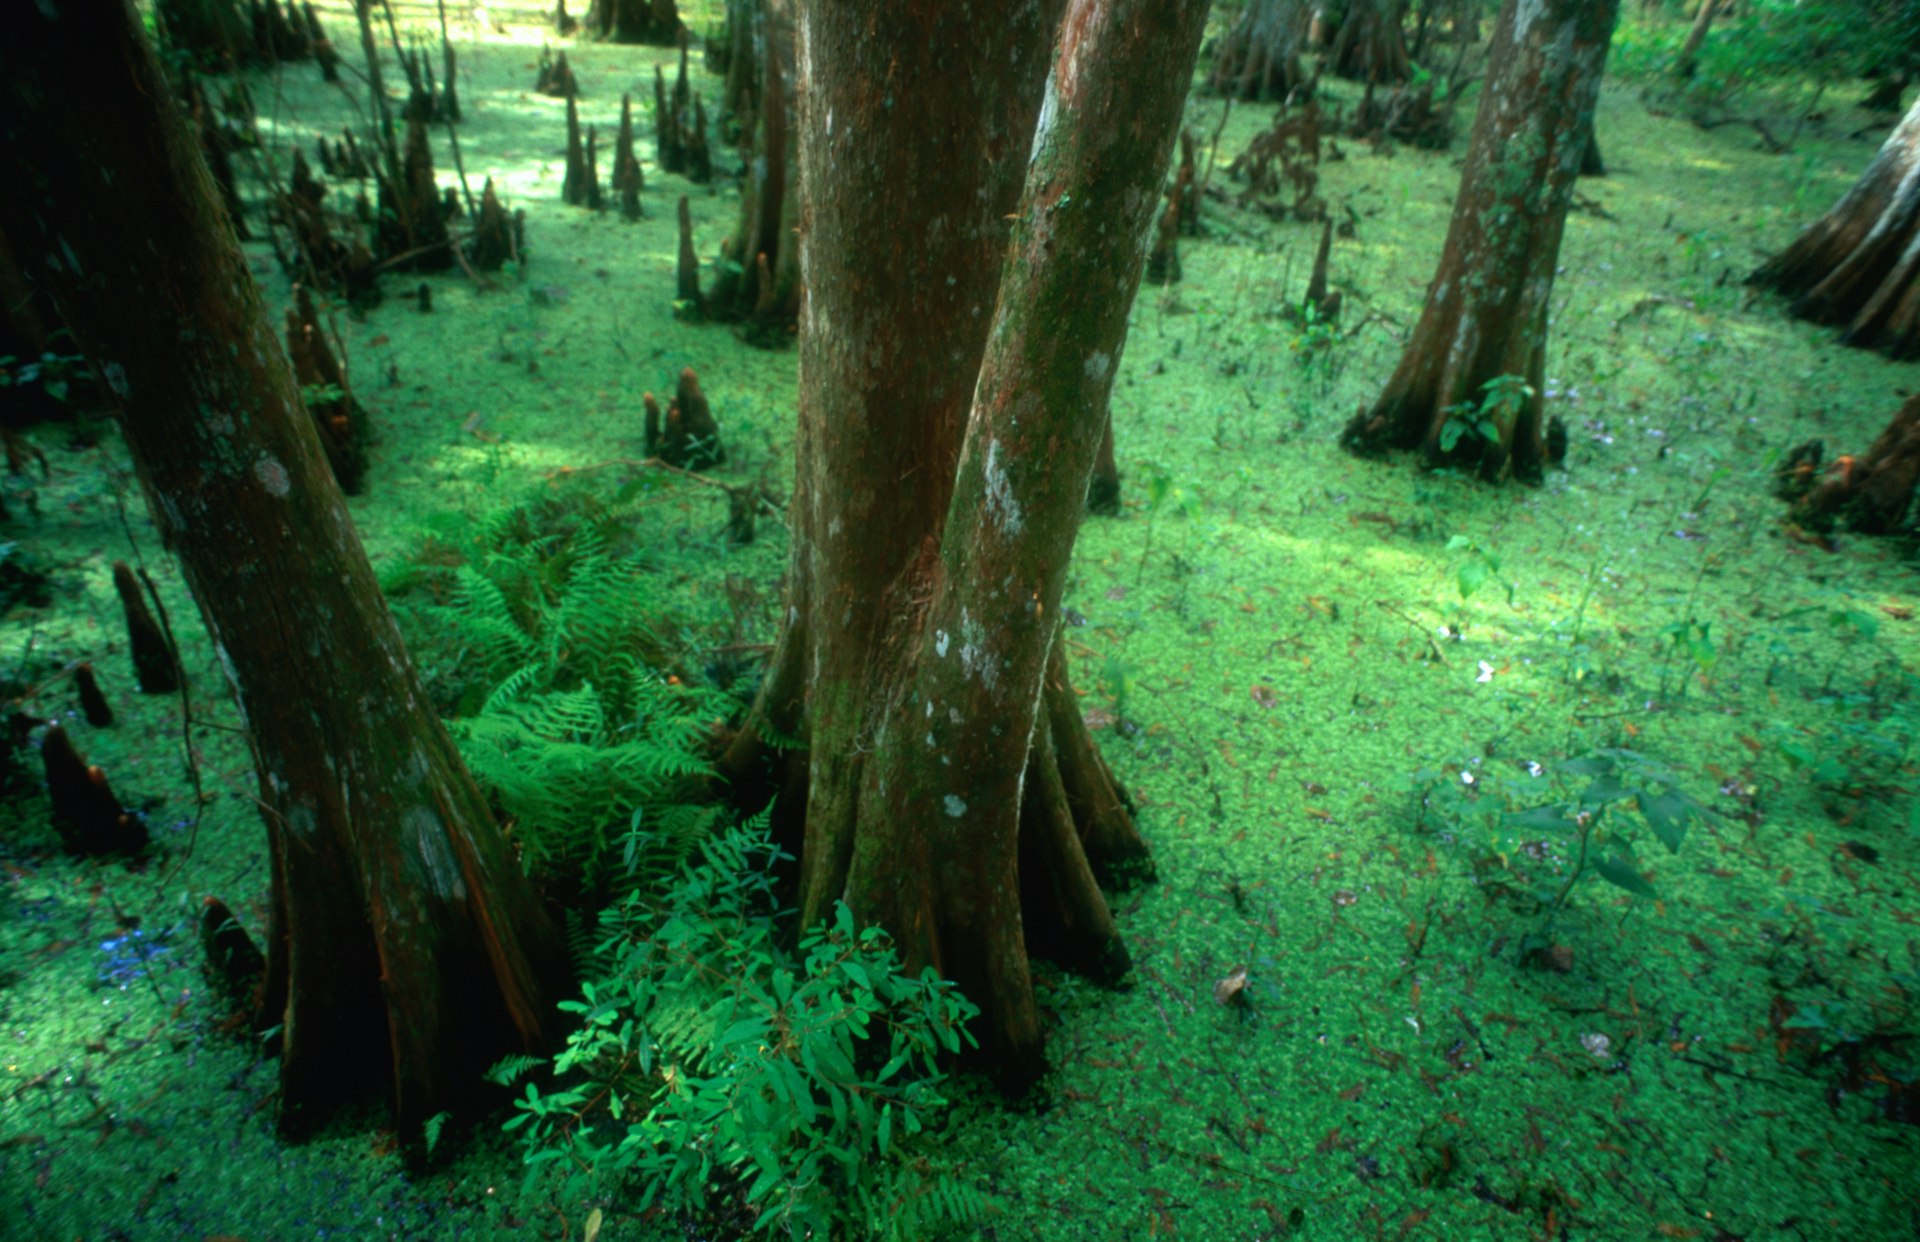 Trees are pictured in a New Orleans forest.